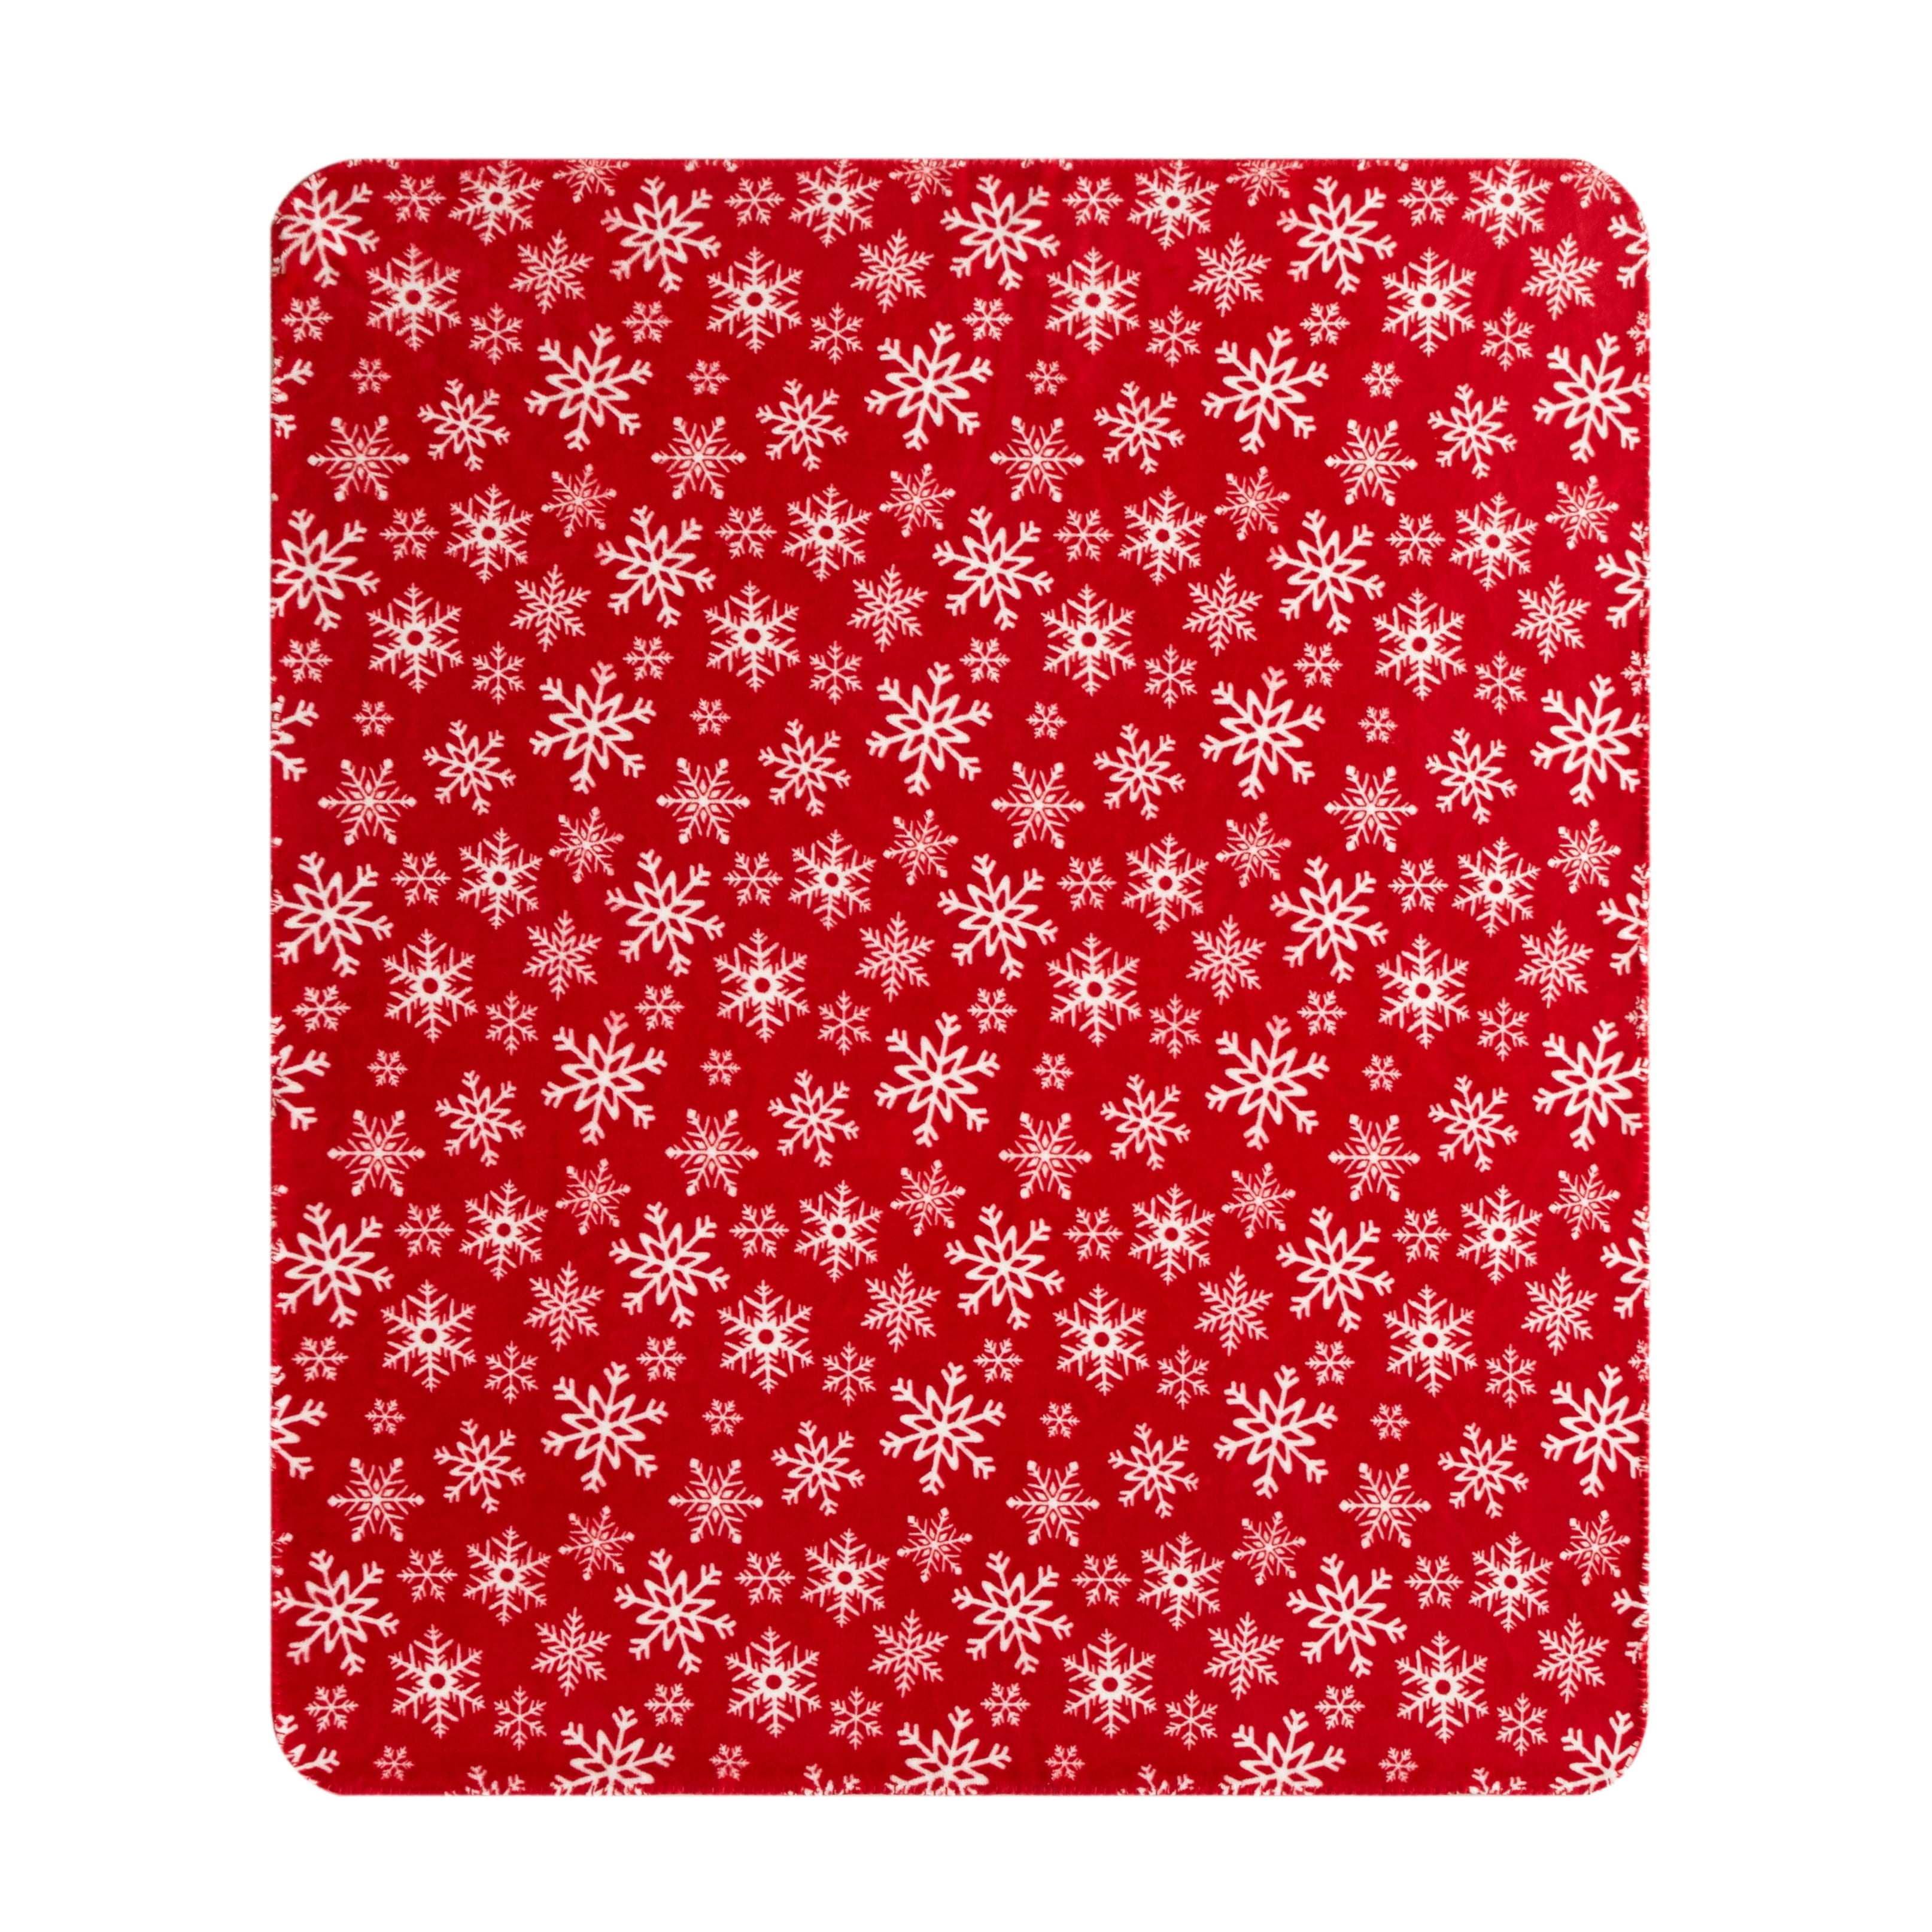 Holiday Time Plush Throw Red Snowflakes, 50" x 60" inches, Red Polyester, Machine Washable